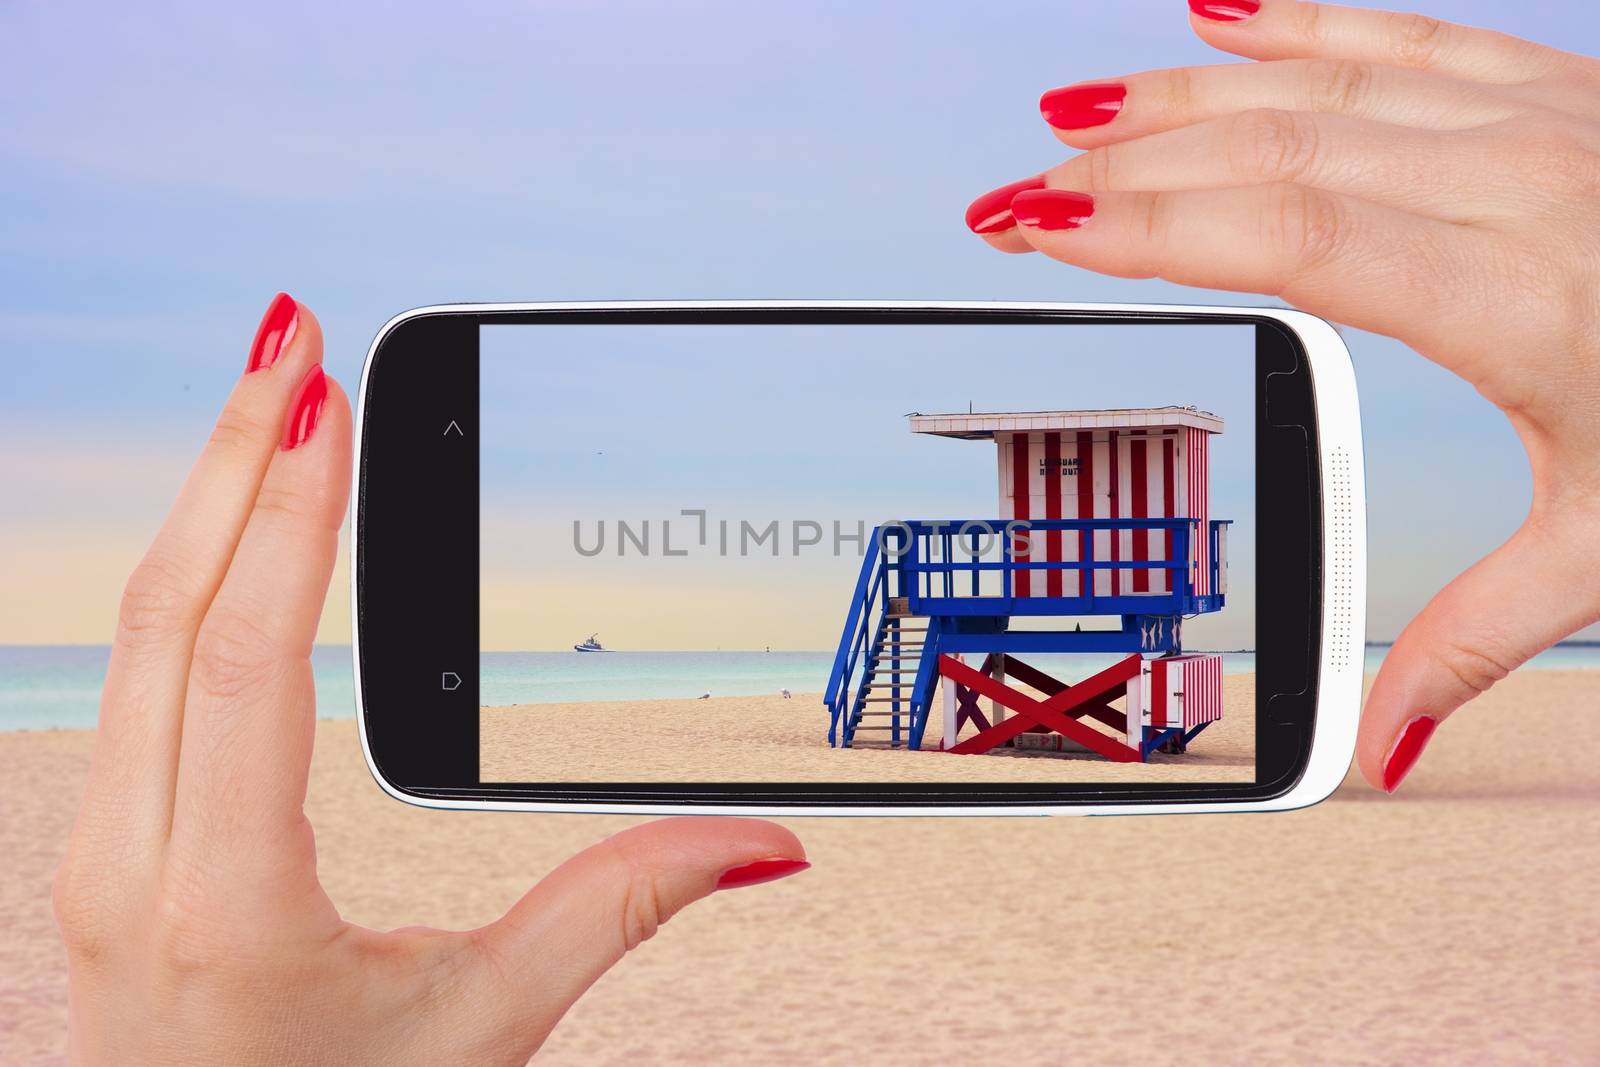 Female tourist taking snapshot with smartphone of lifeguard cabin, Miami Beach, Florida, USA. Backpacking, vagabonding, travelling.